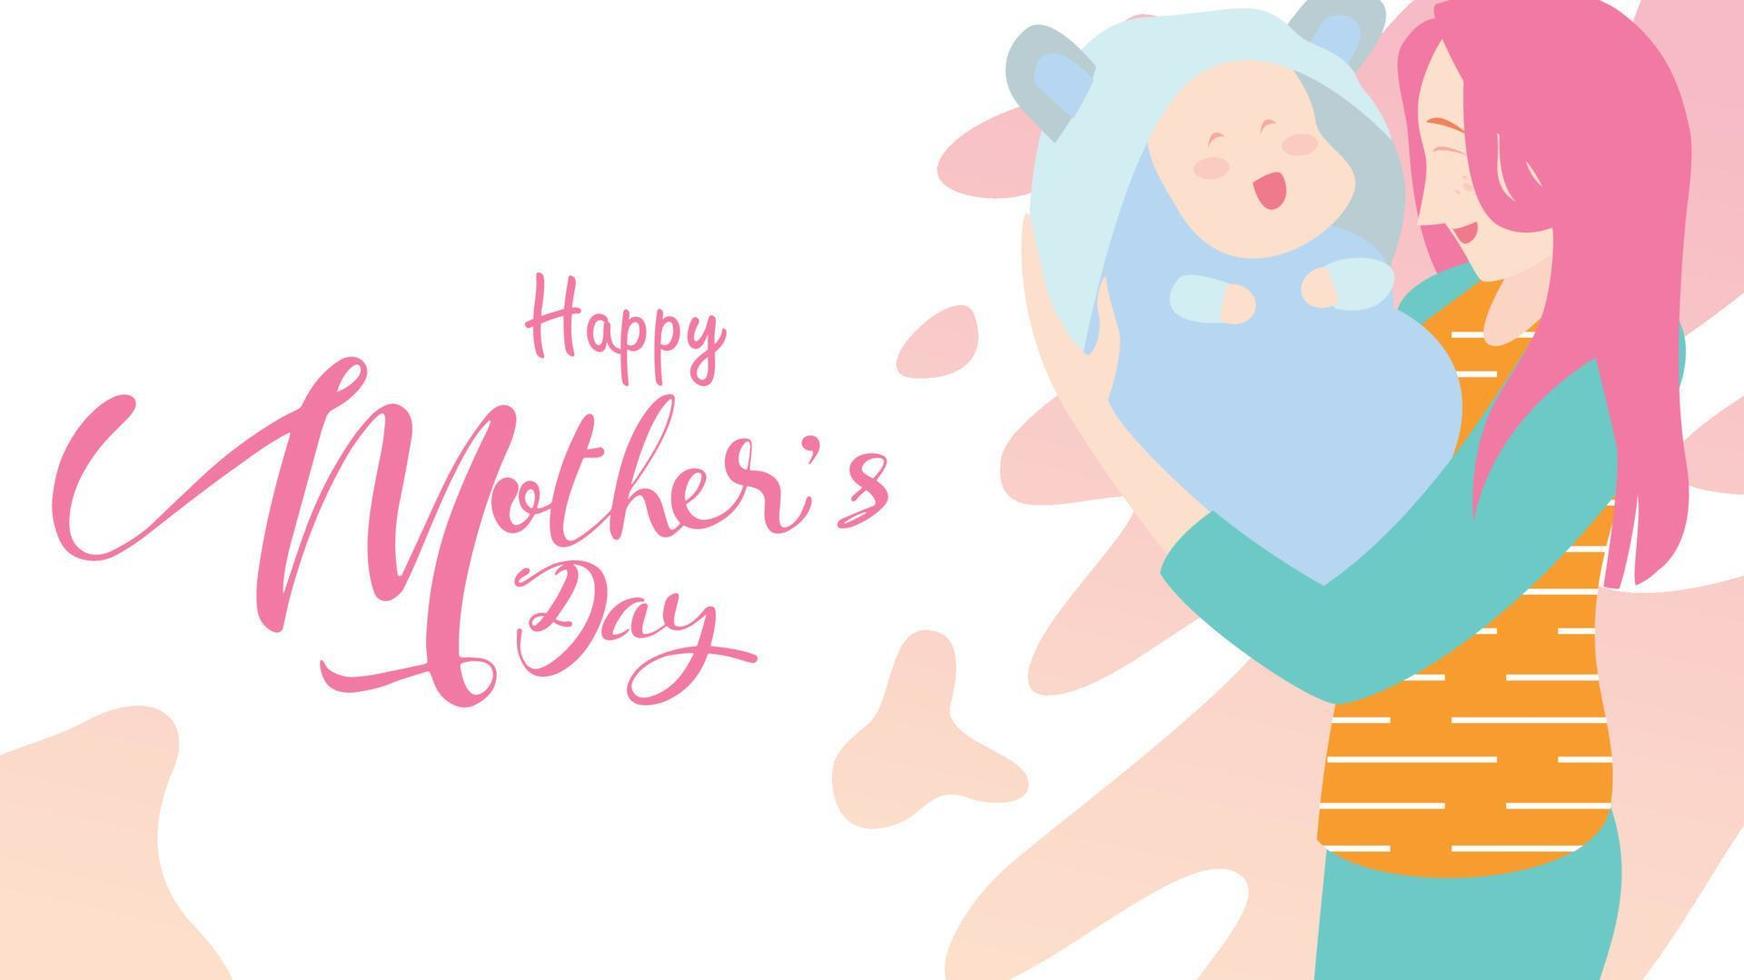 Happy mother's day beautiful Mum laughing, smiling and holding healthy baby with happy. Colorful vector illustration flat design style. Flat cartoon style. - vector